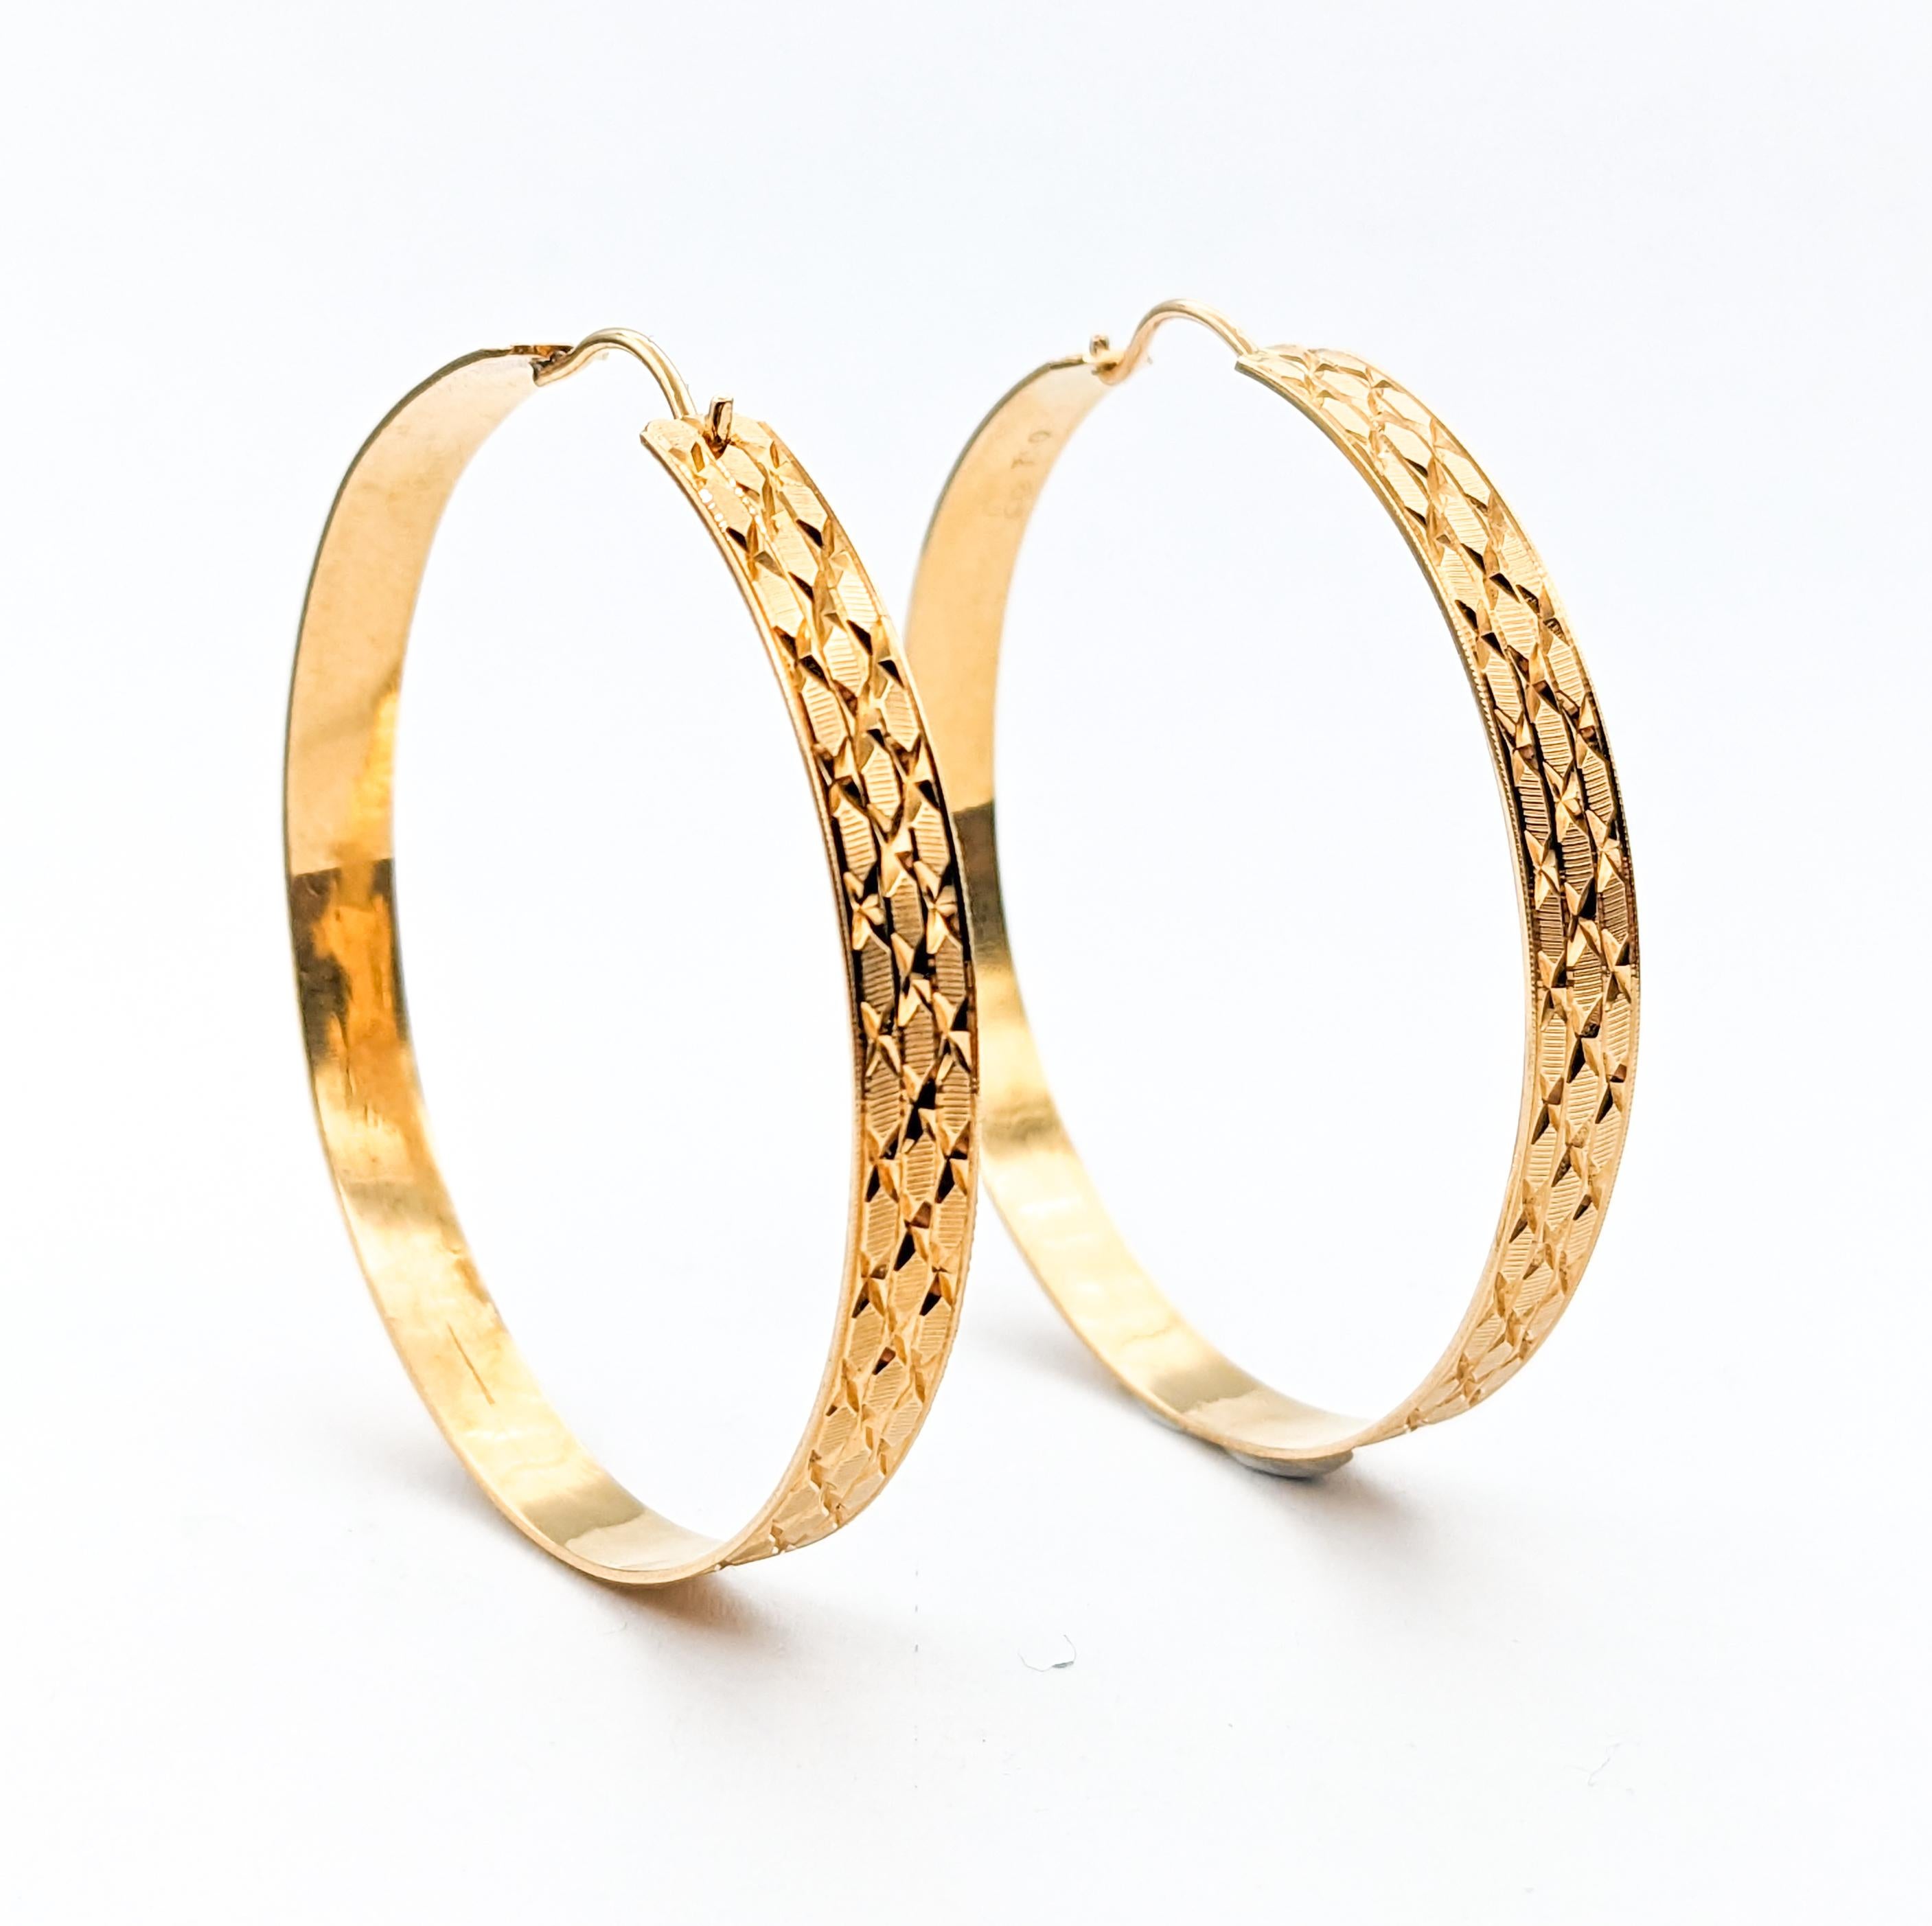 Textured Vintage Hoop Earrings in Yellow Gold

Introducing this fantastic pair of vintage Hoop Earrings, exquisitely crafted in bright 18K Yellow Gold. These earrings showcase a unique texture and substantial 4.9mm width. With a size of 1.6